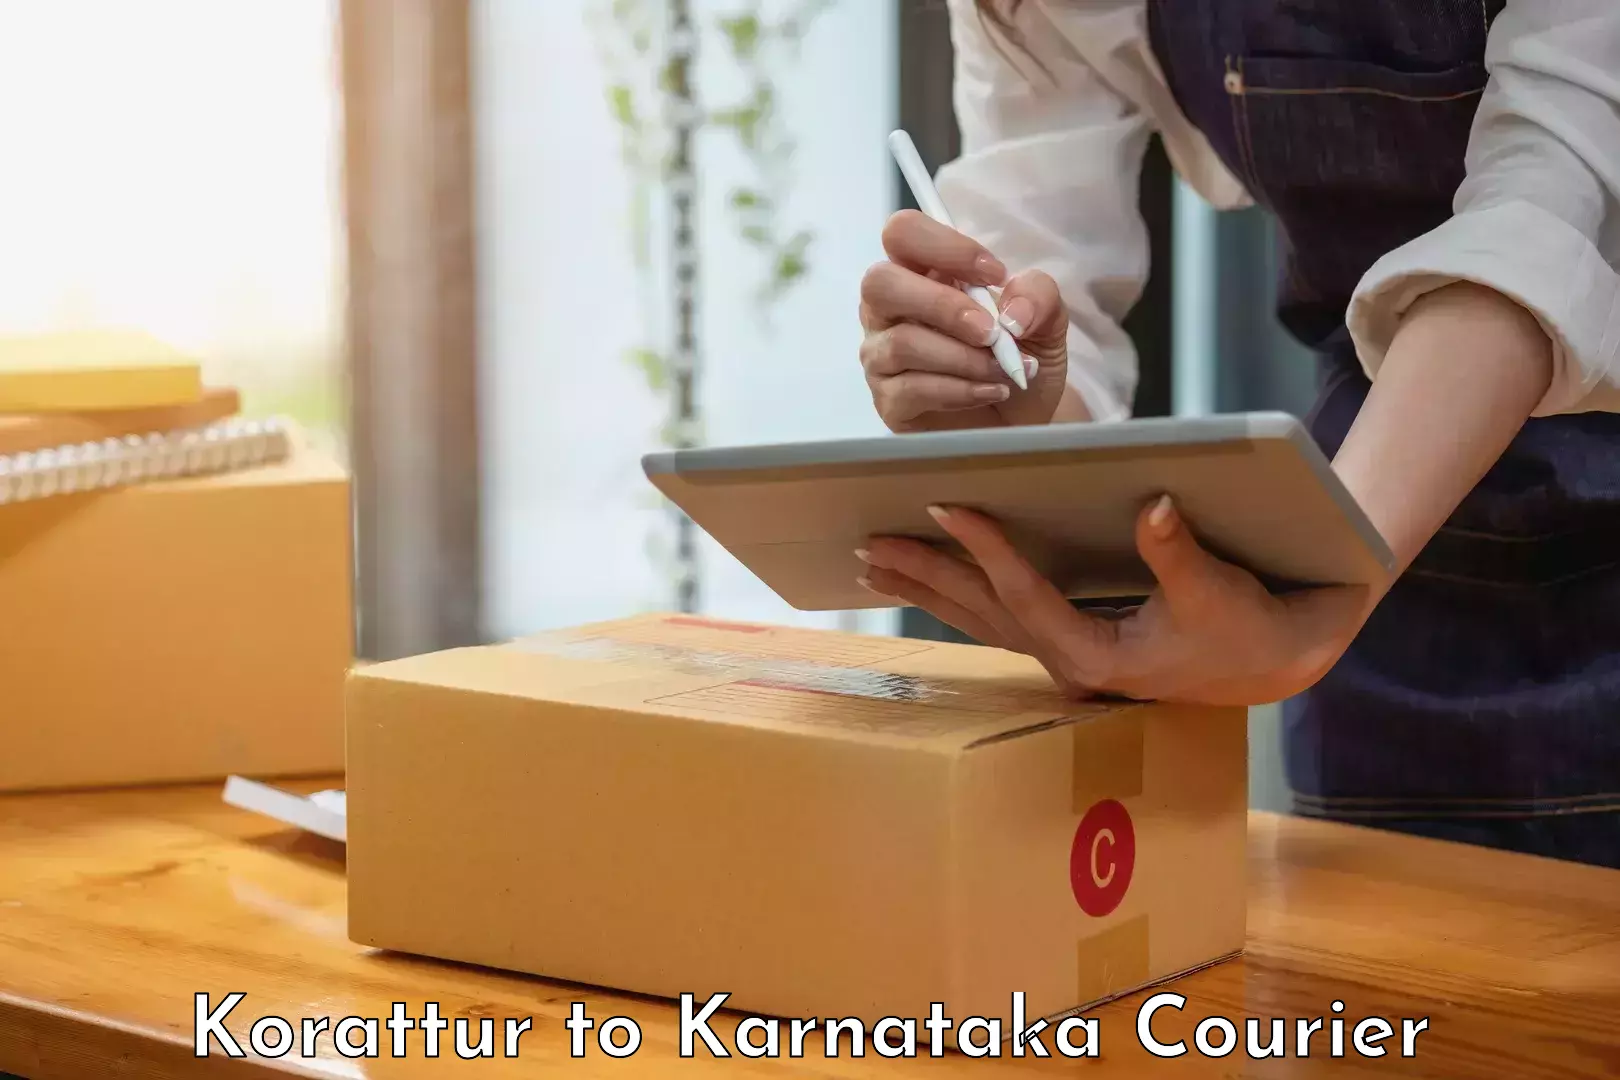 Nationwide delivery network Korattur to Mallapur